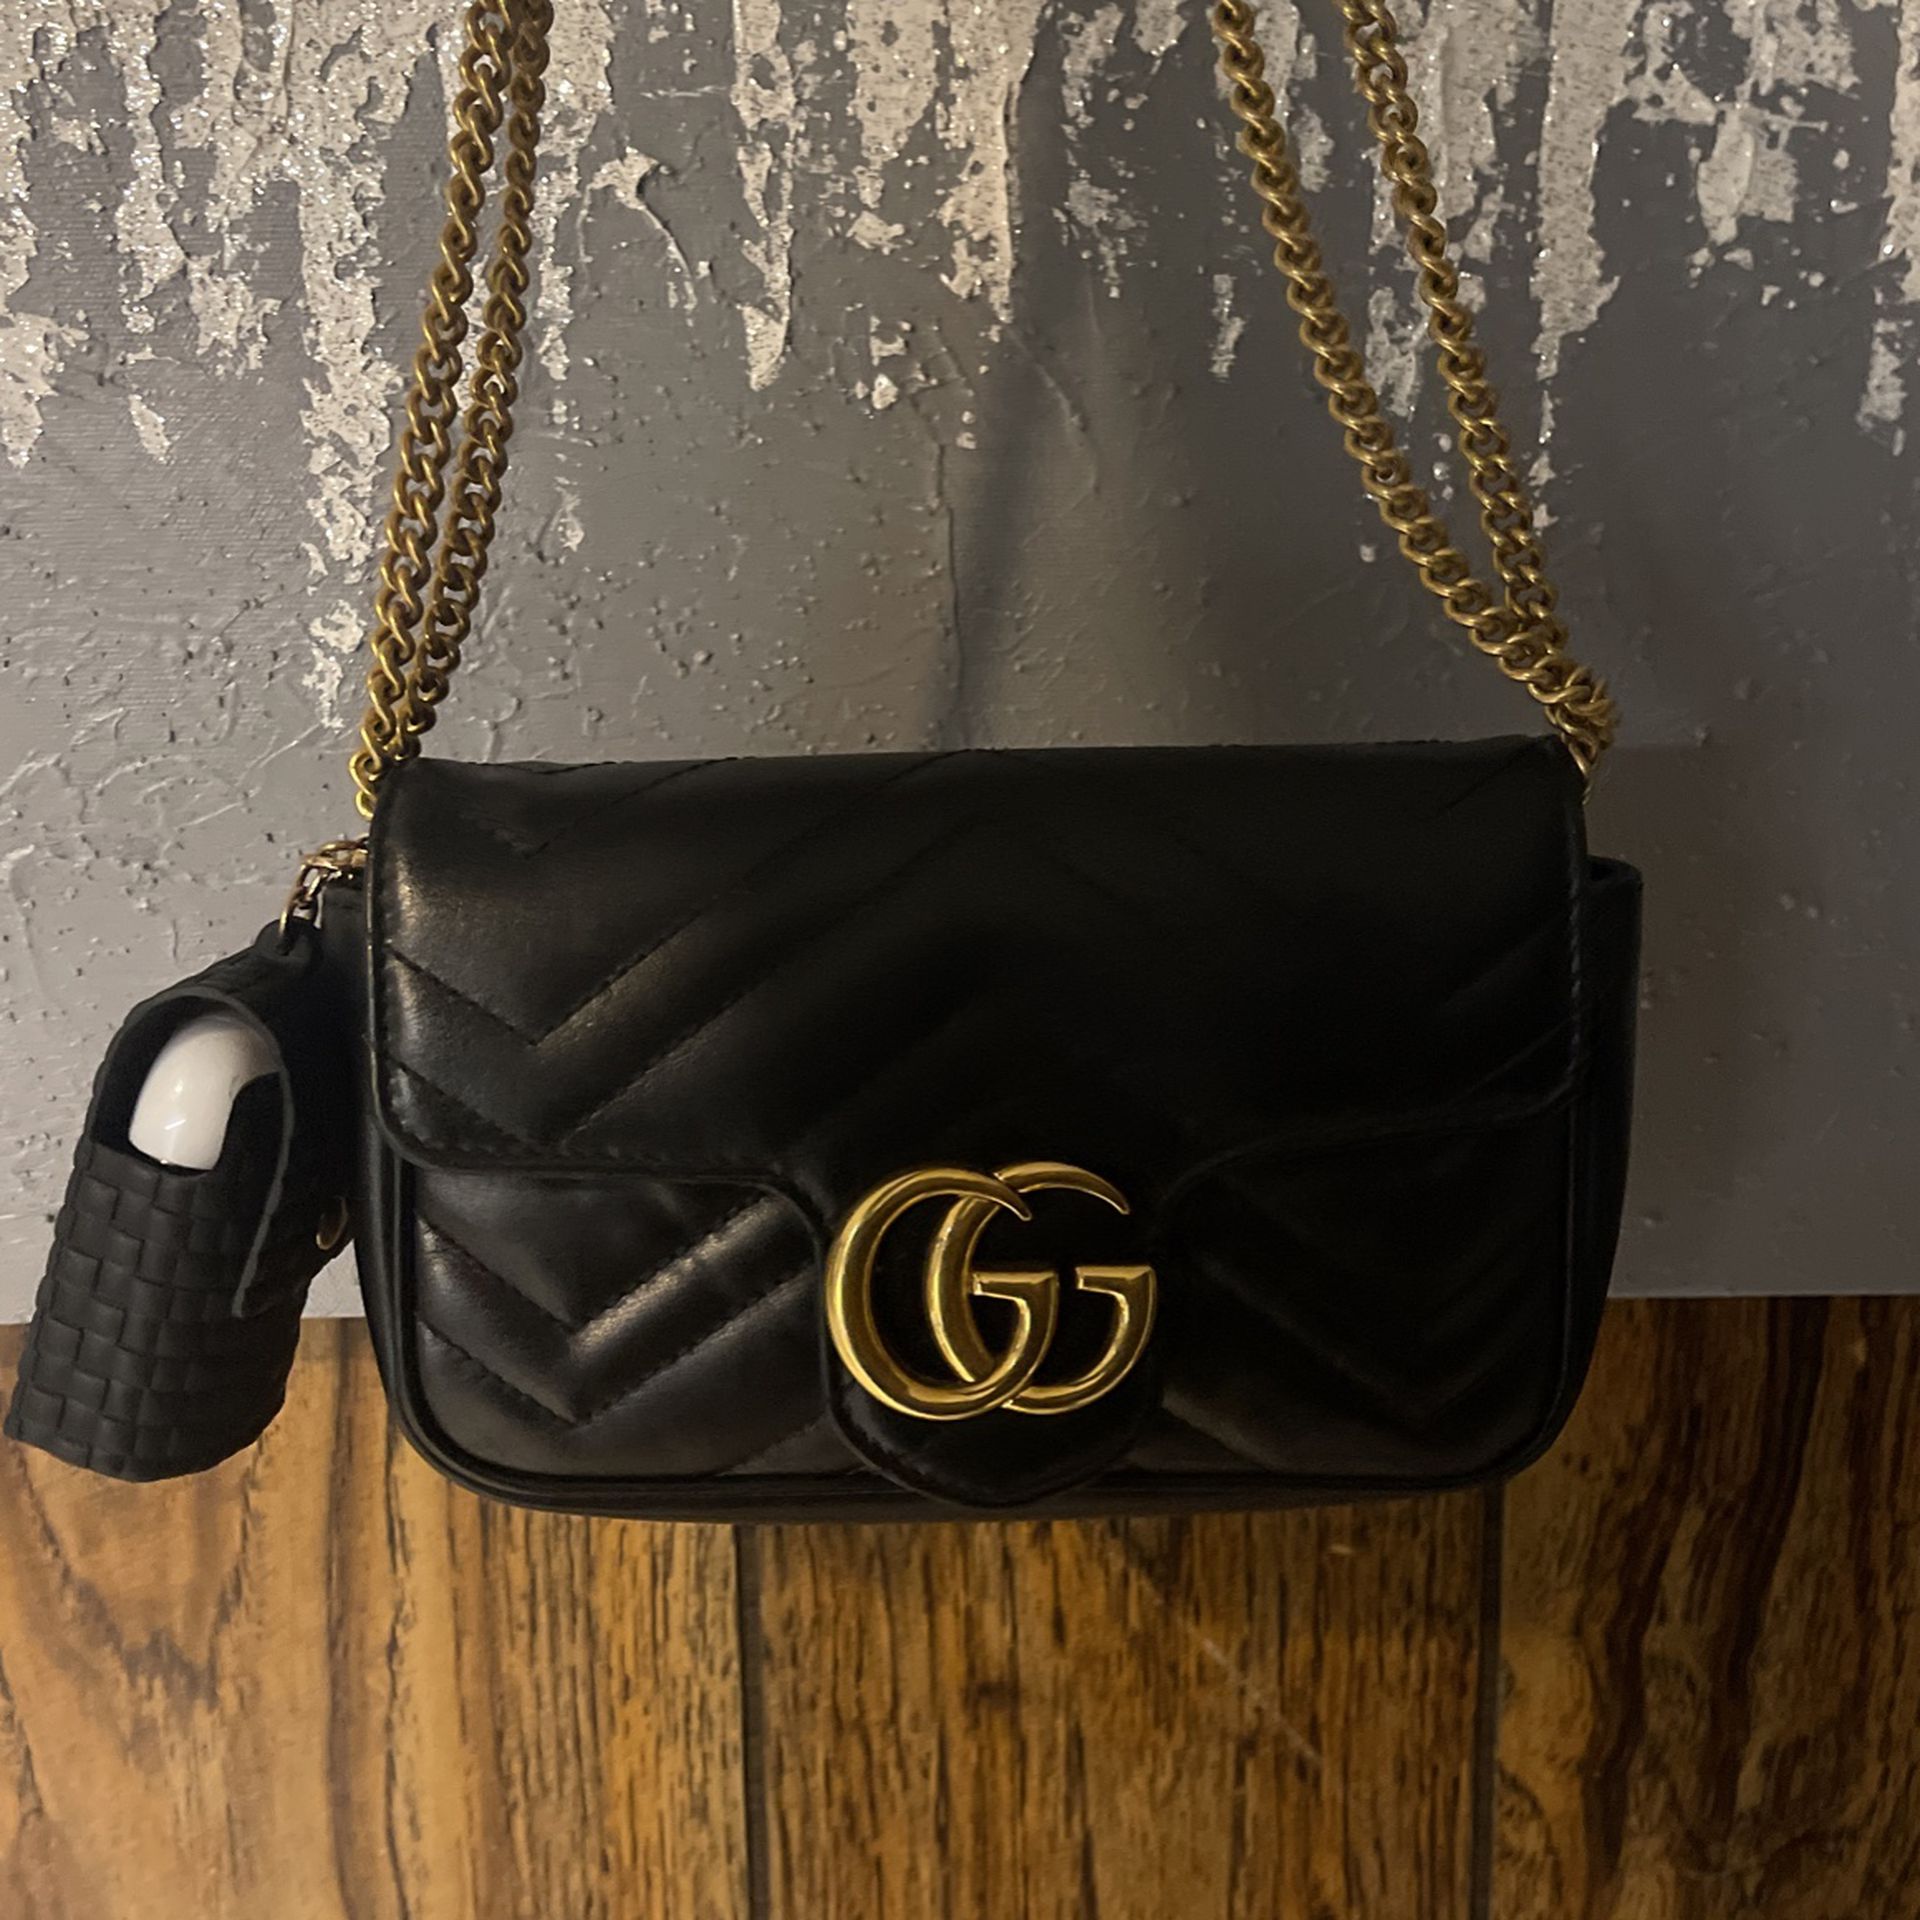 Gucci Chest Bag for Sale in Jackson Township, NJ - OfferUp